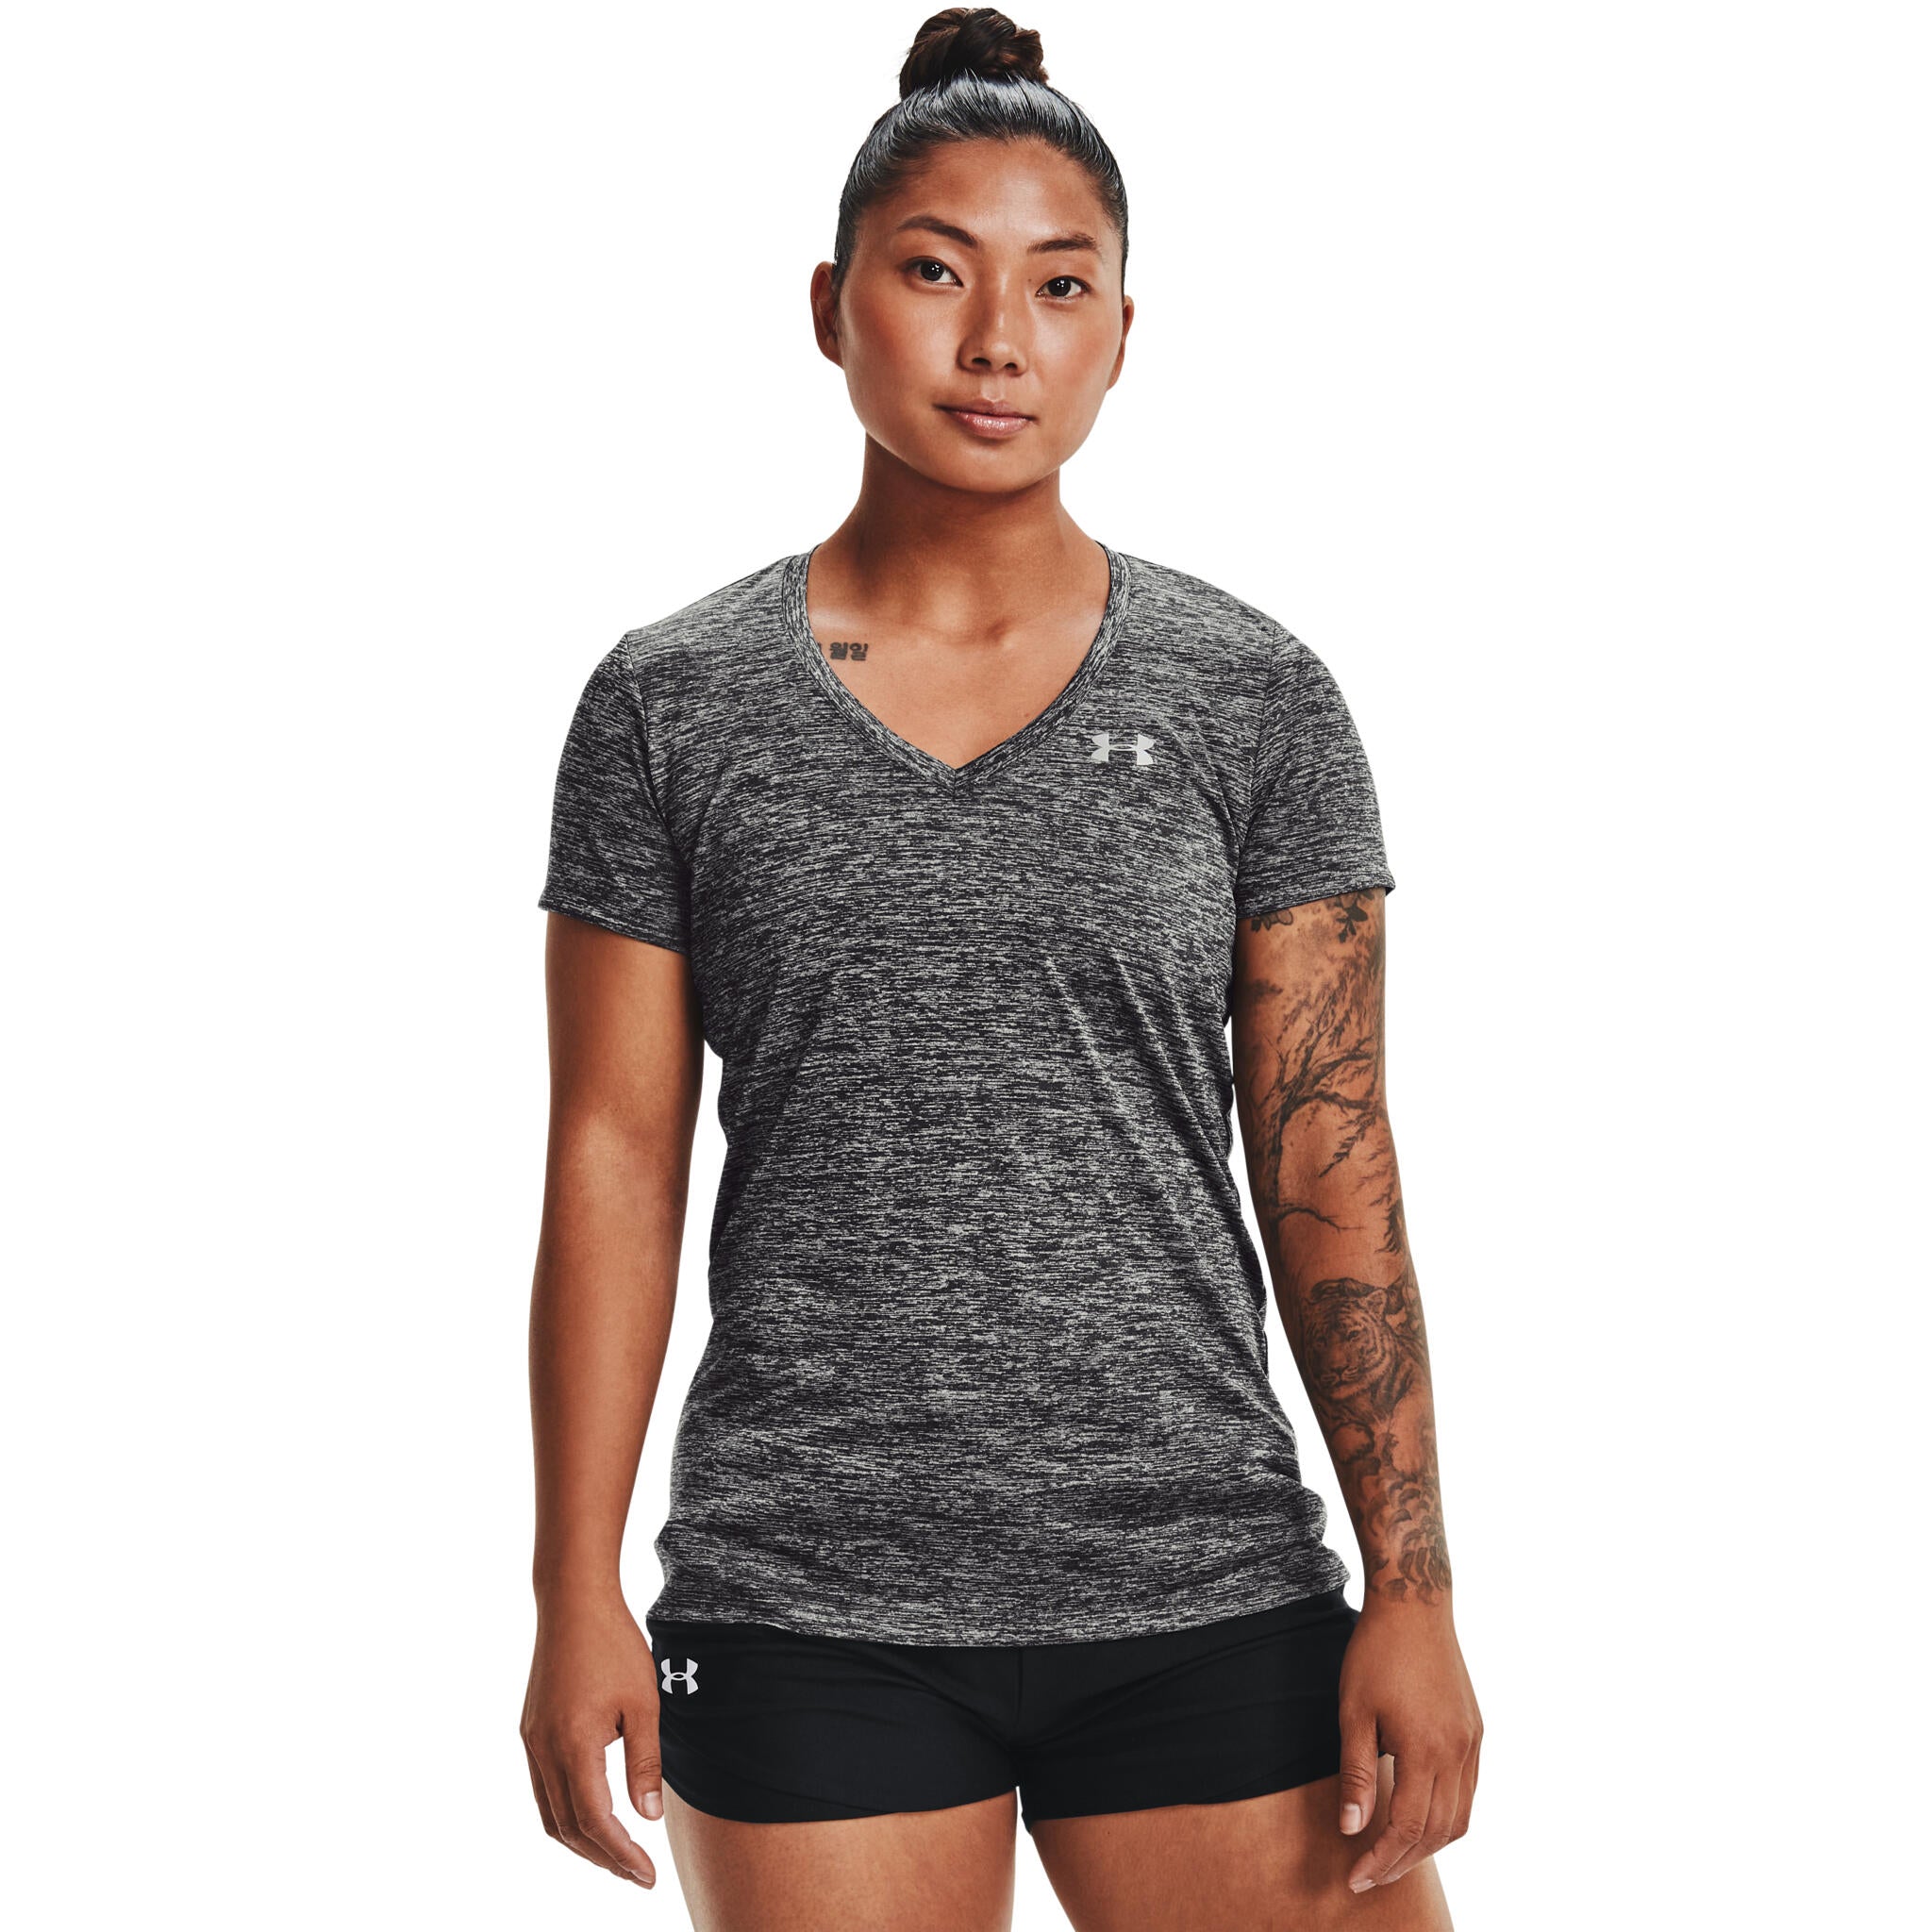  Under Armour Womens Tech V-Neck Twist Short-Sleeve T-Shirt,  (879) After Burn/White/Metallic Silver, X-Small : Clothing, Shoes & Jewelry